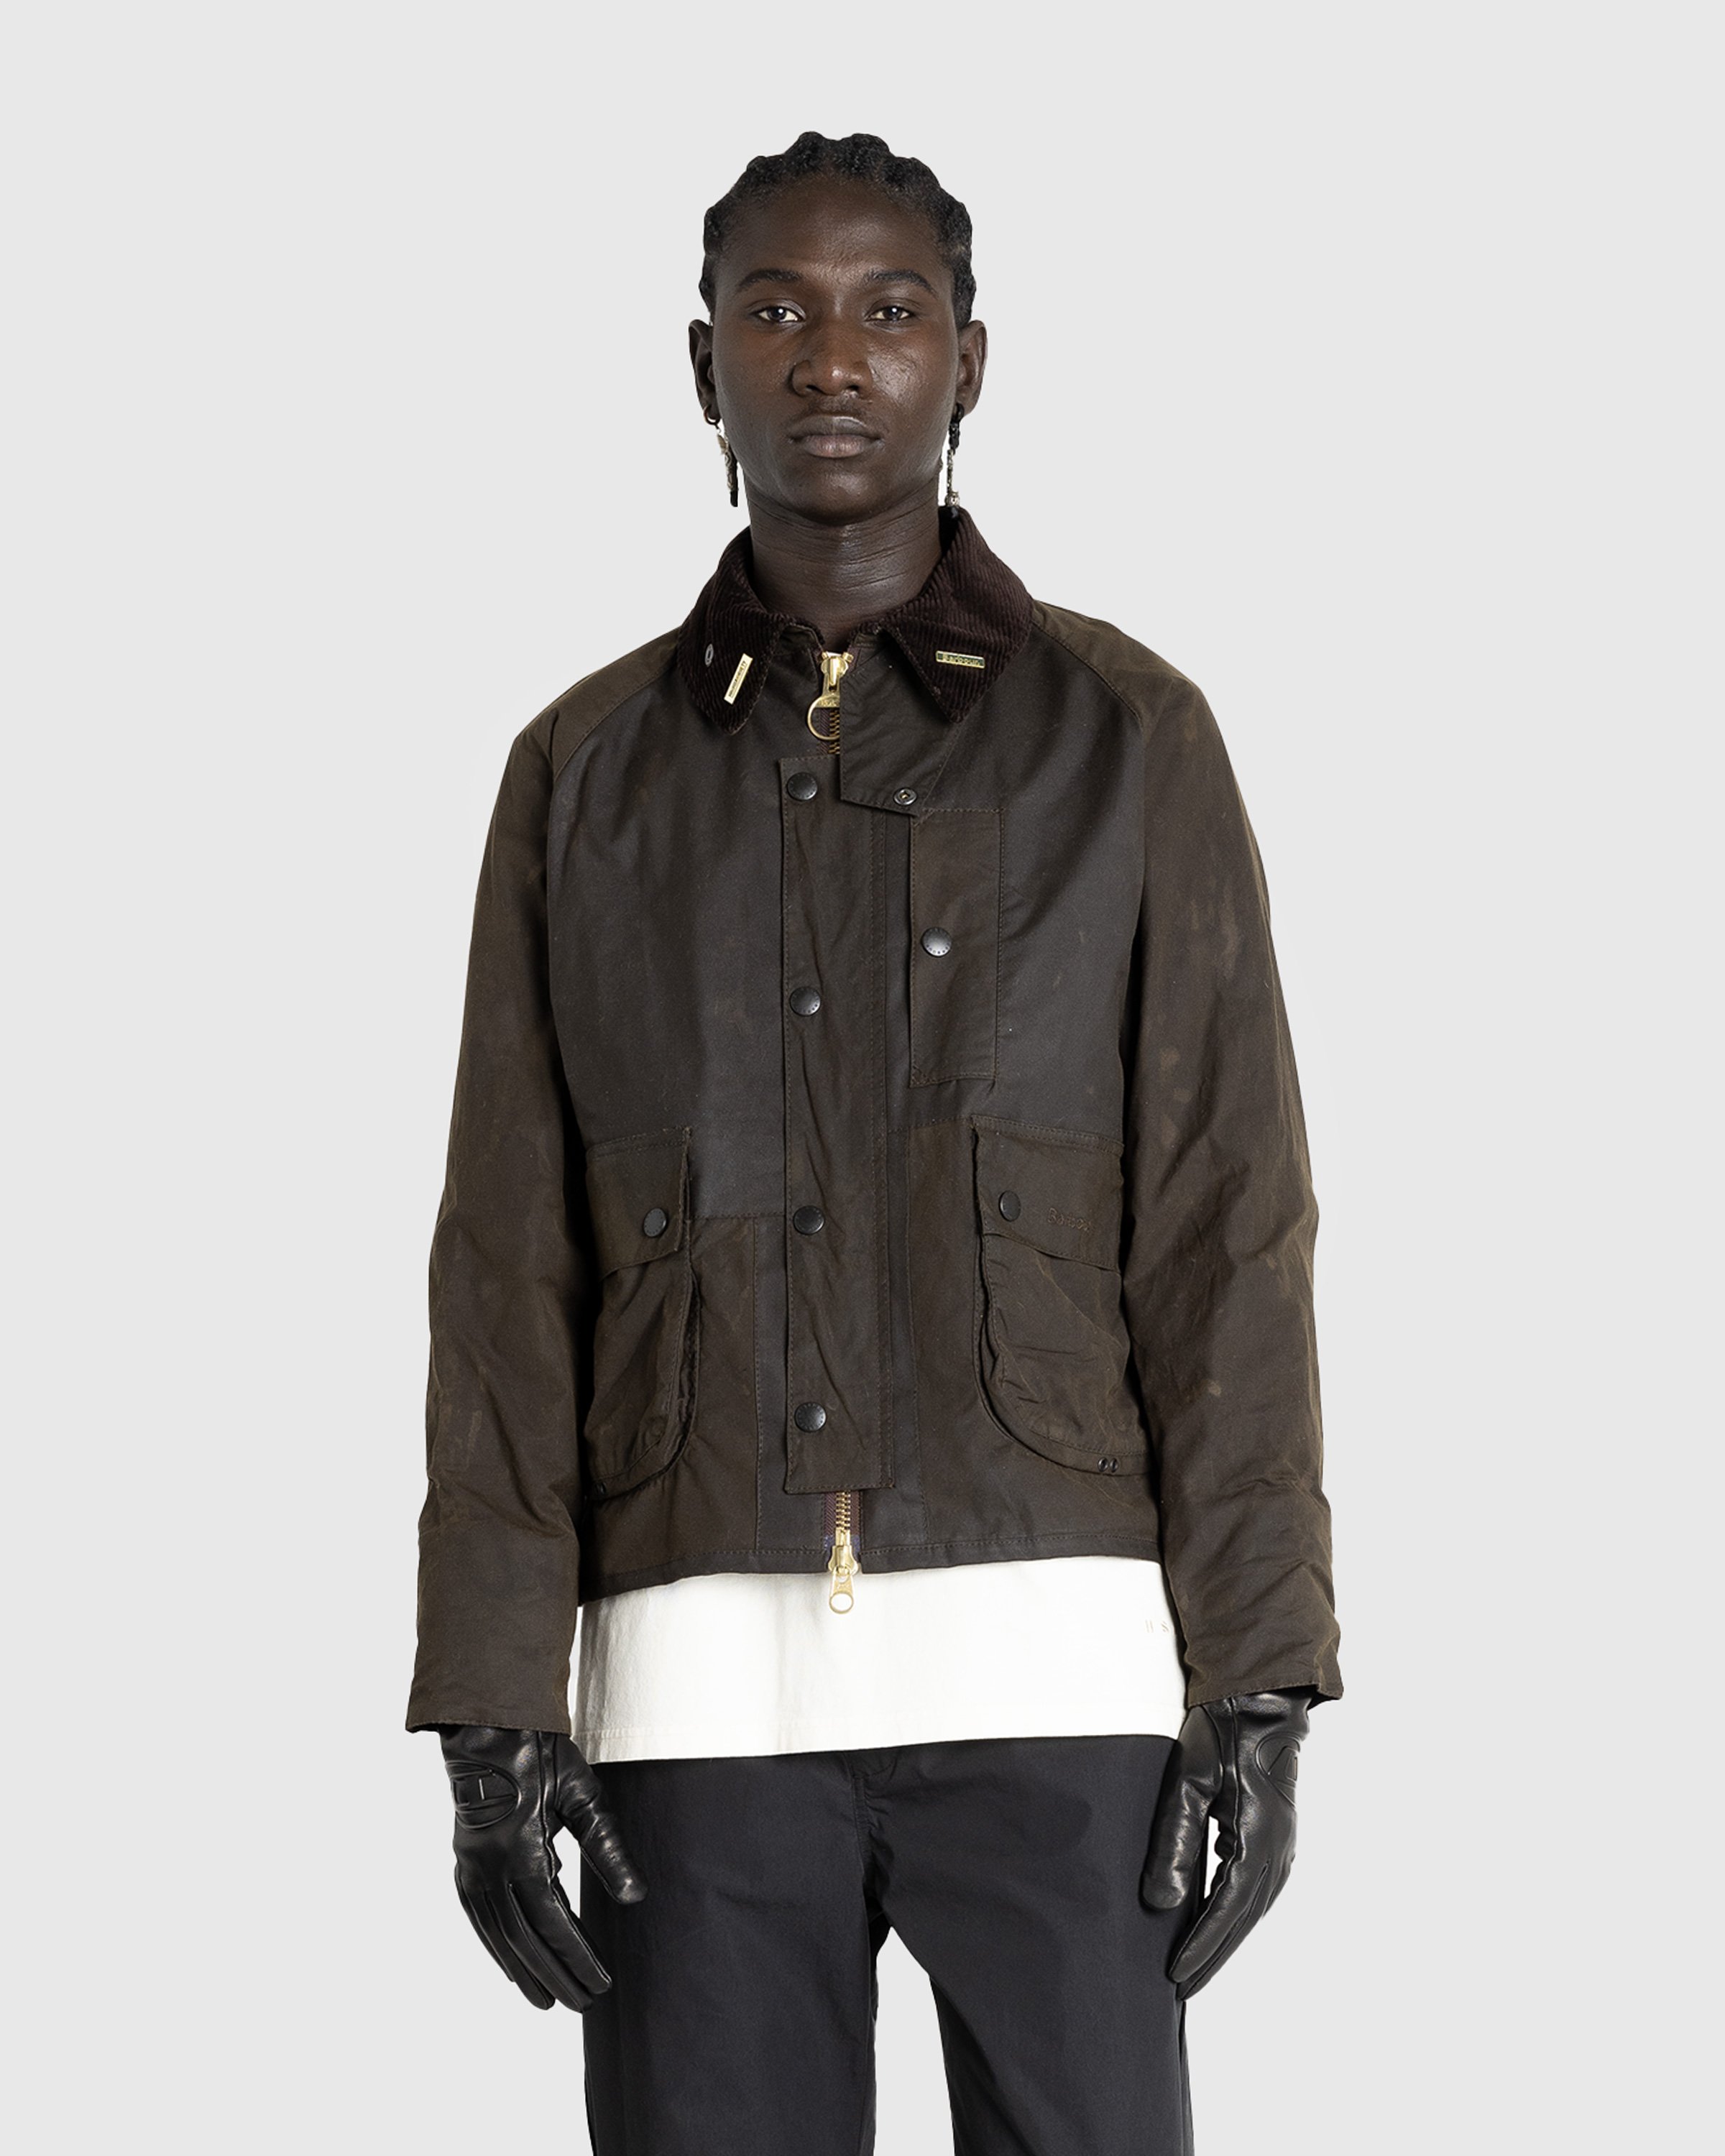 Barbour x Highsnobiety - Re-Loved Cropped Bedale Jacket 1 - 36 - Rusty-Brown - Clothing -  - Image 5